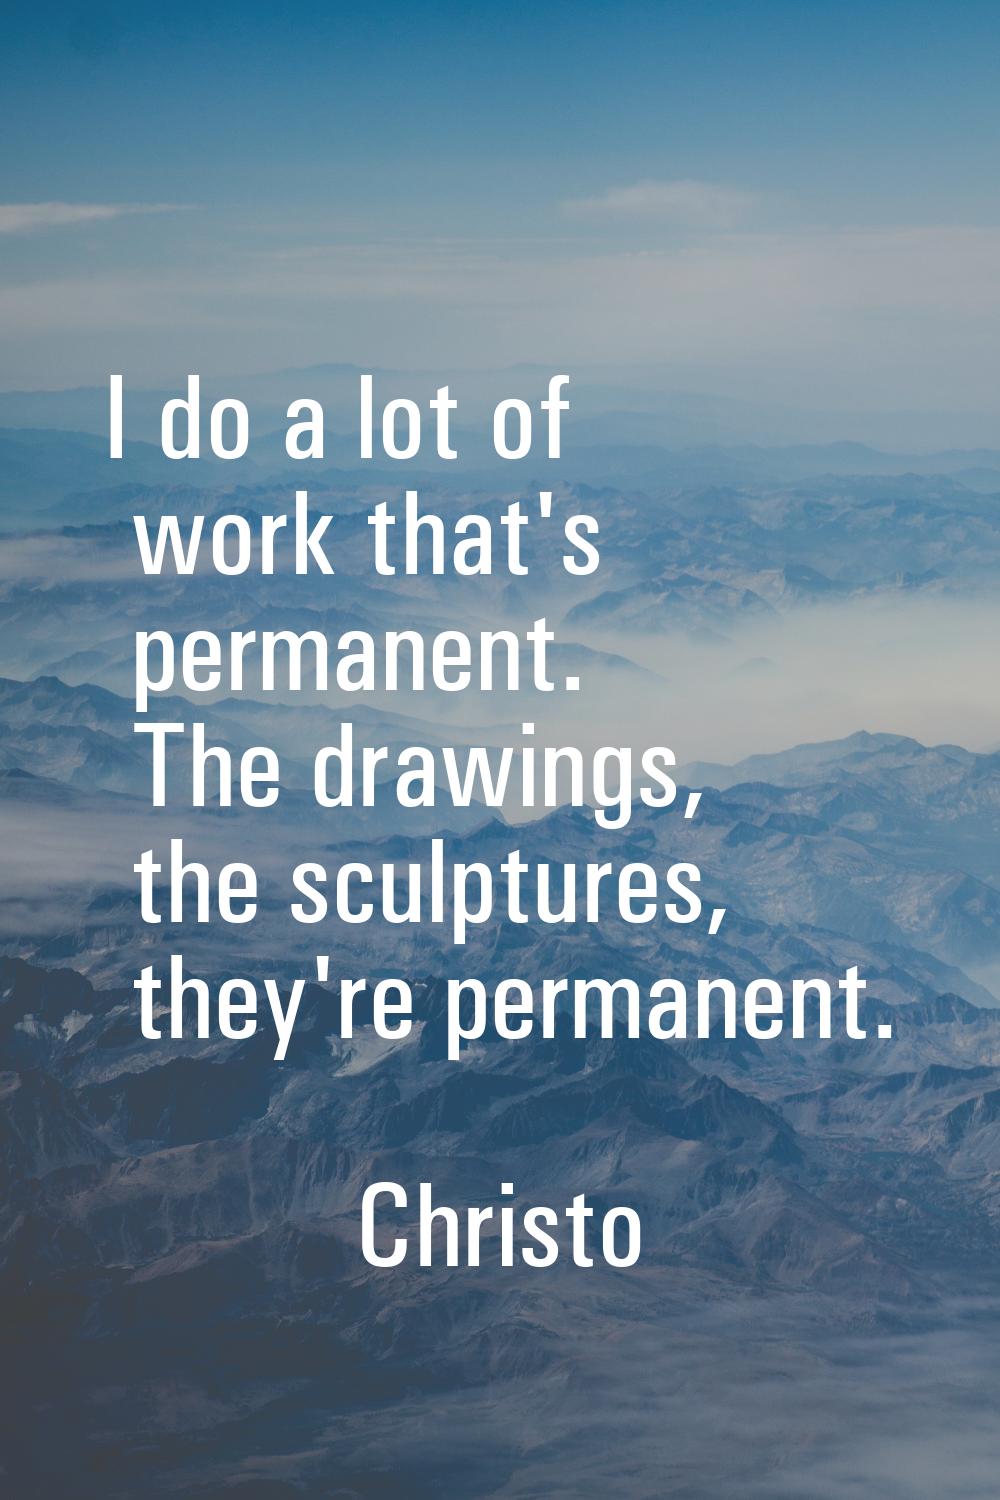 I do a lot of work that's permanent. The drawings, the sculptures, they're permanent.